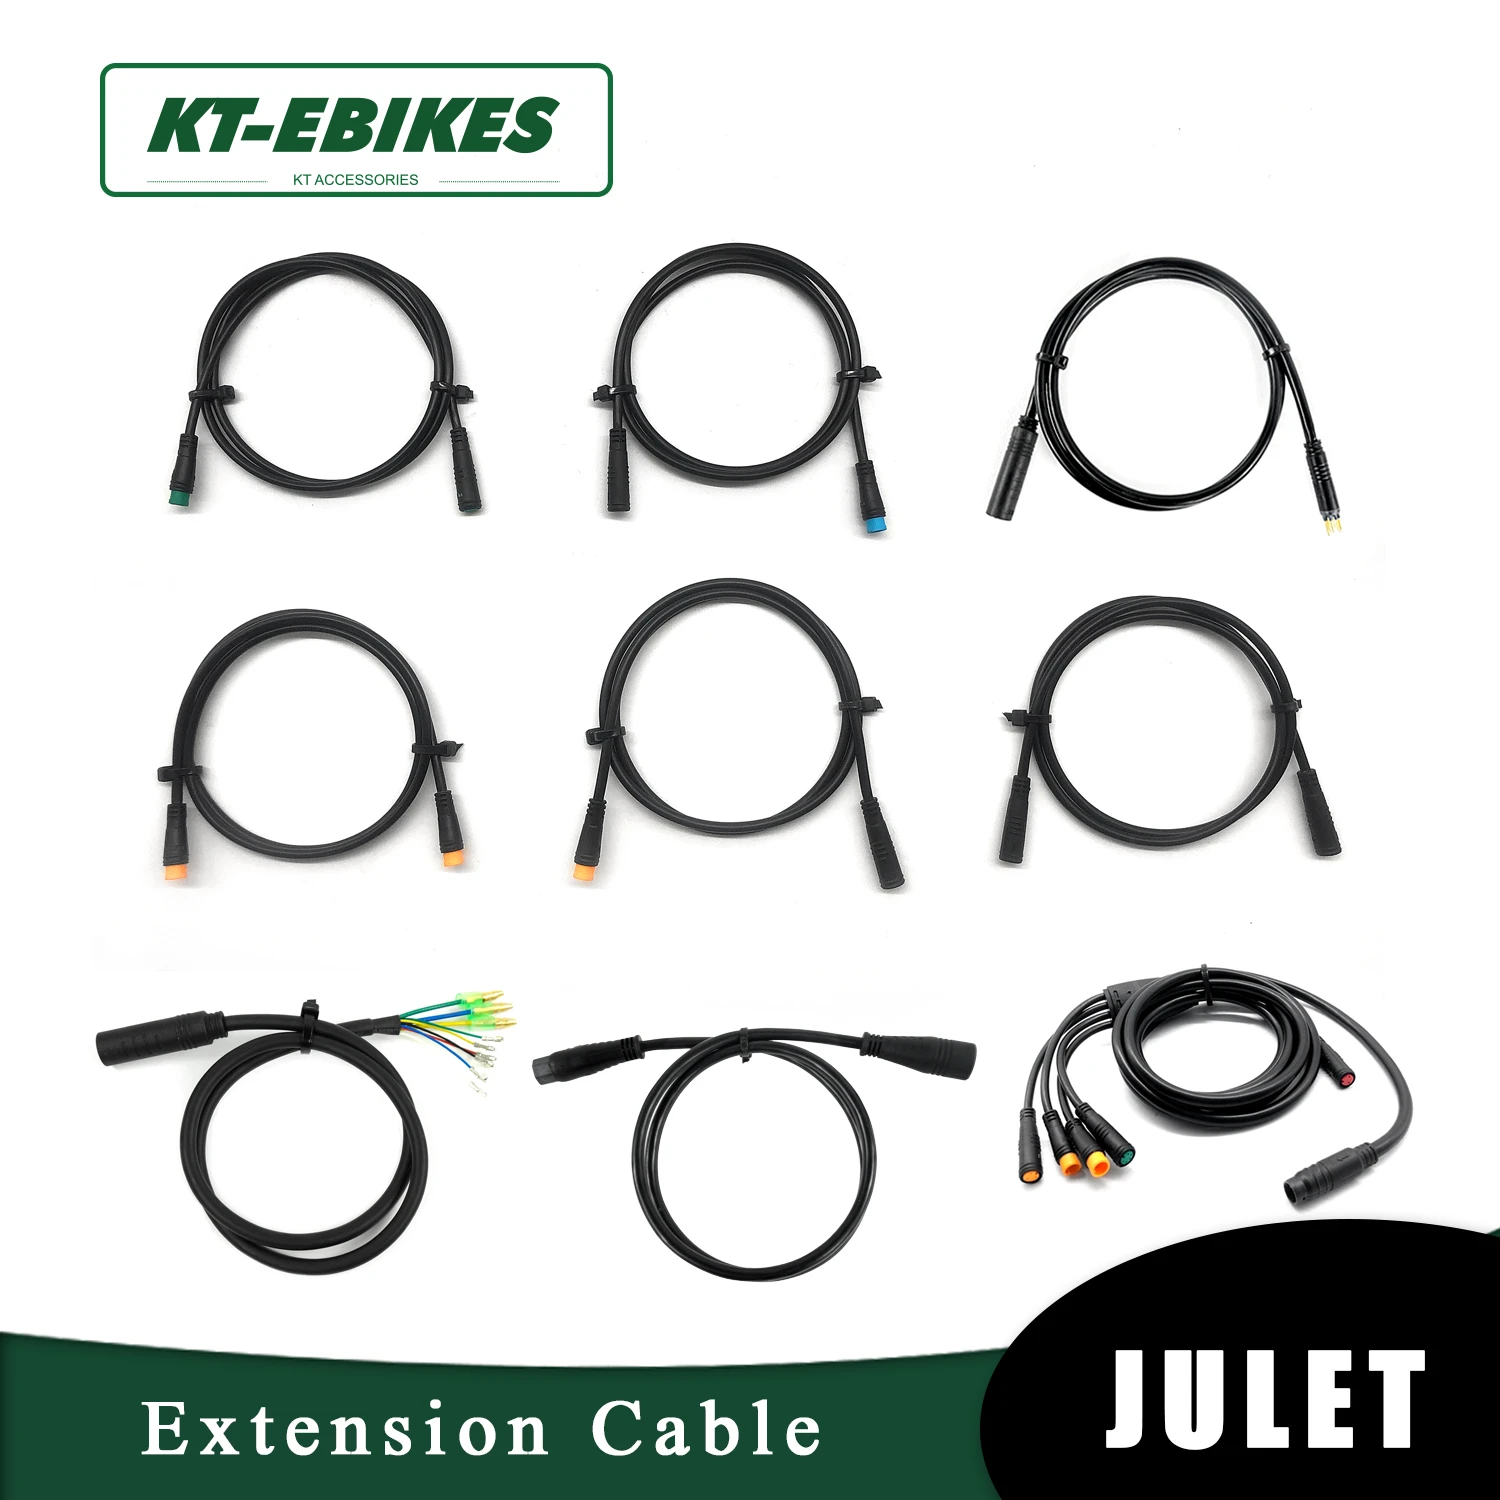 Julet Cable Ebike 2 3 4 5 Pin Conversion Convert Line Waterproof Extension Cable Wire for Throttle Display Ebrake Light